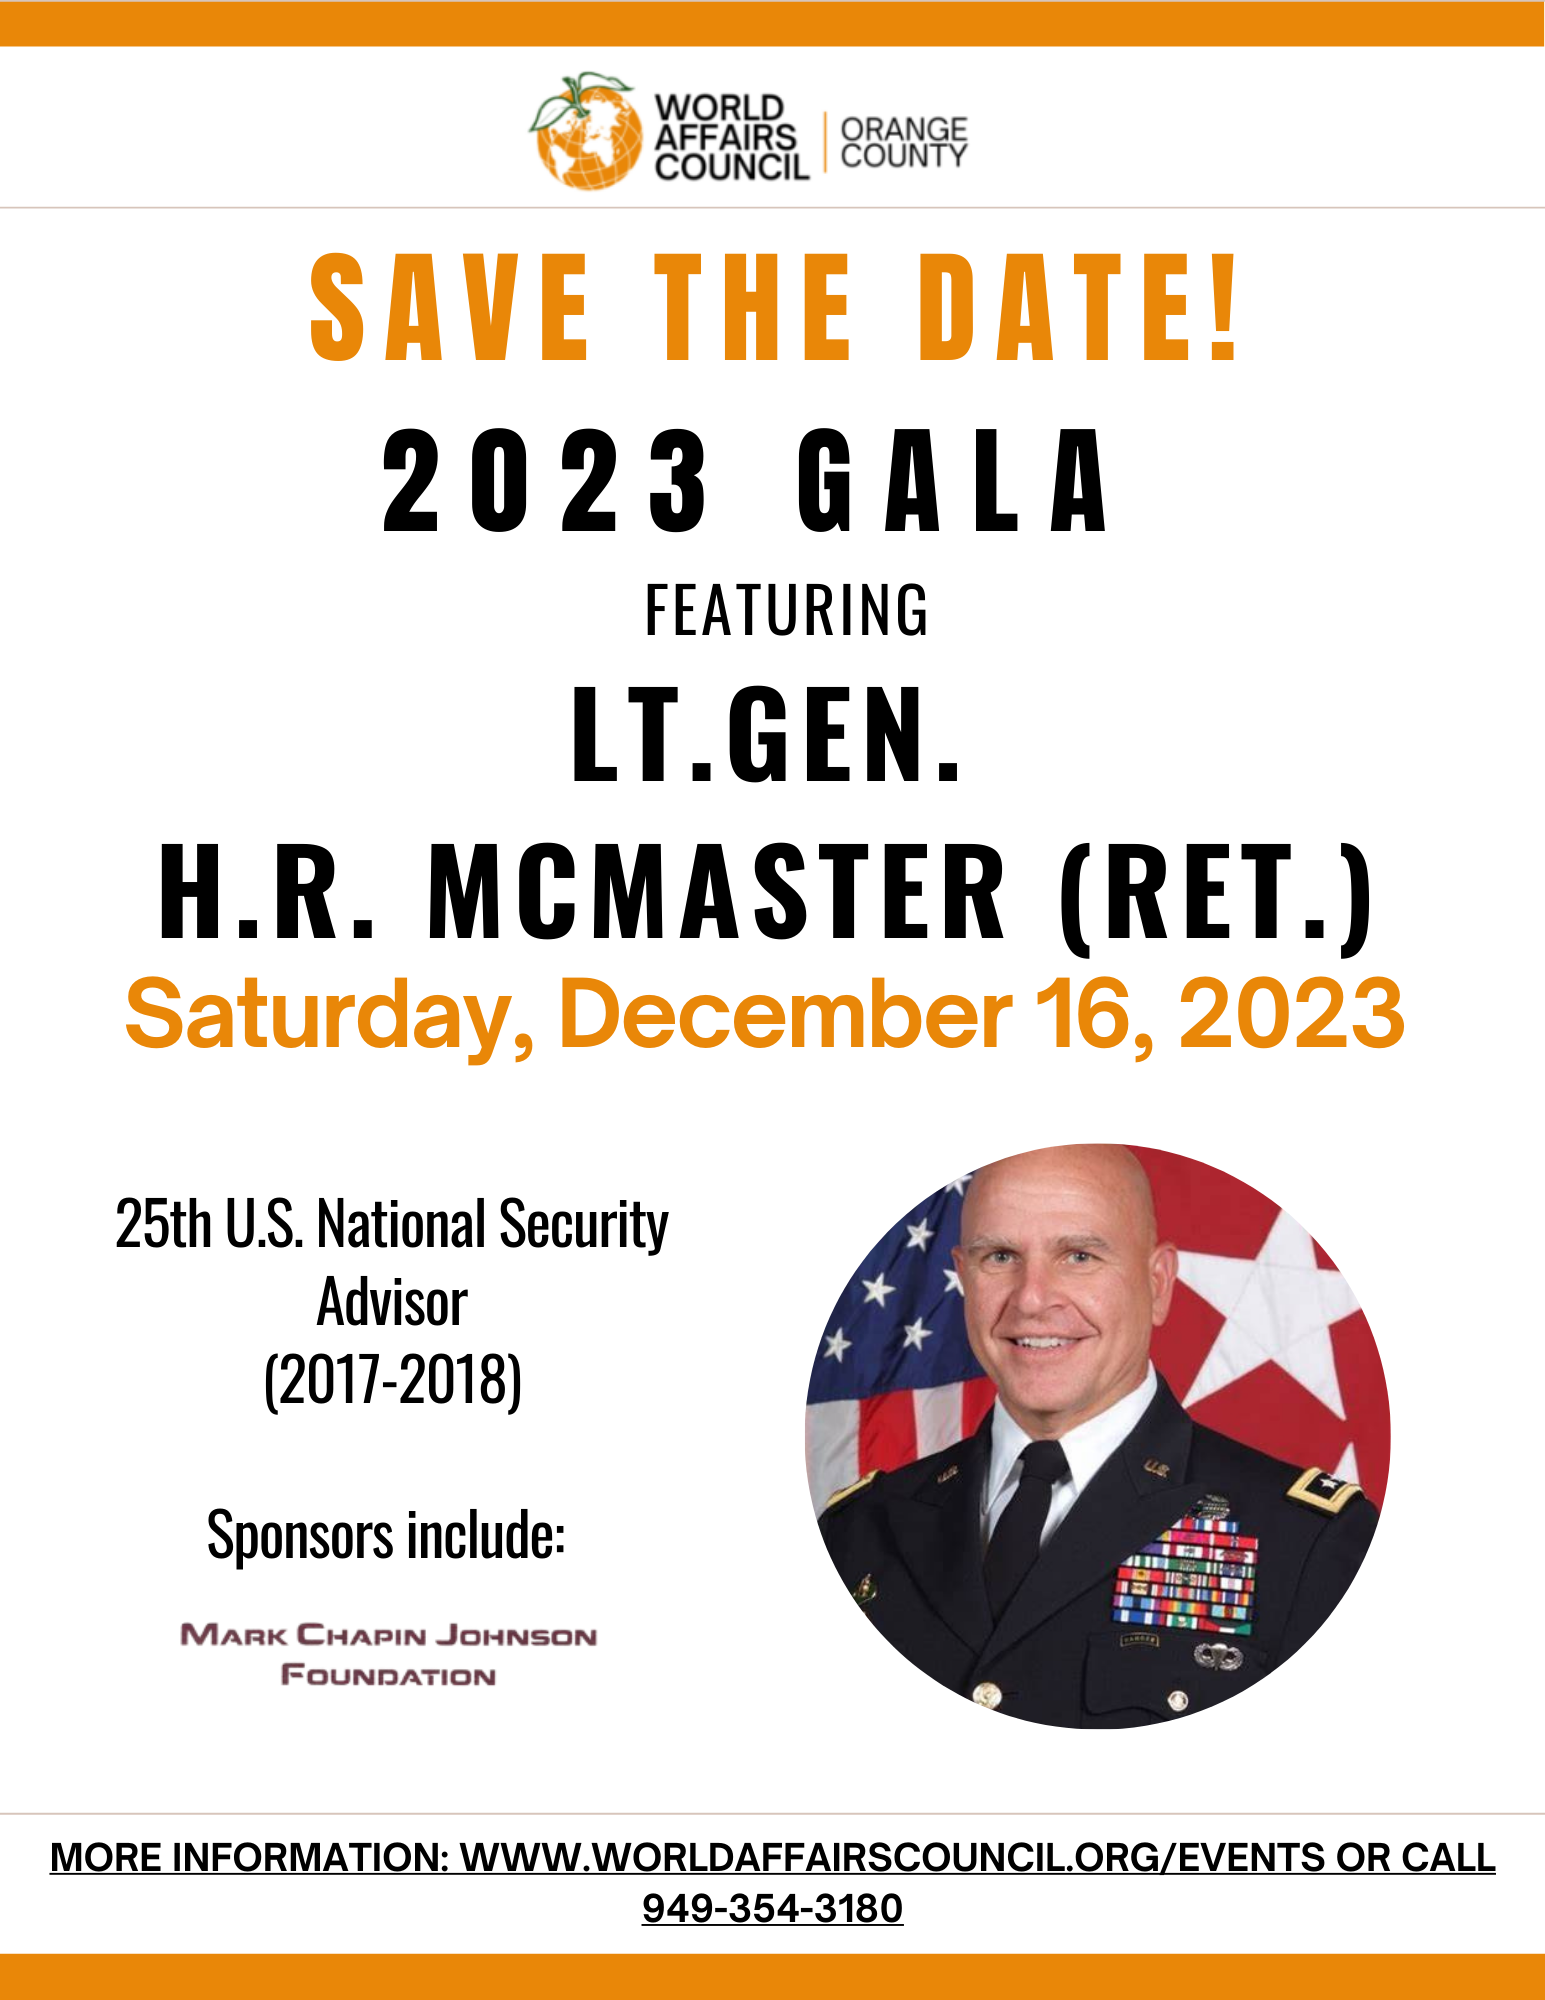 Annual Gala with Lt. Gen. H.R. McMaster